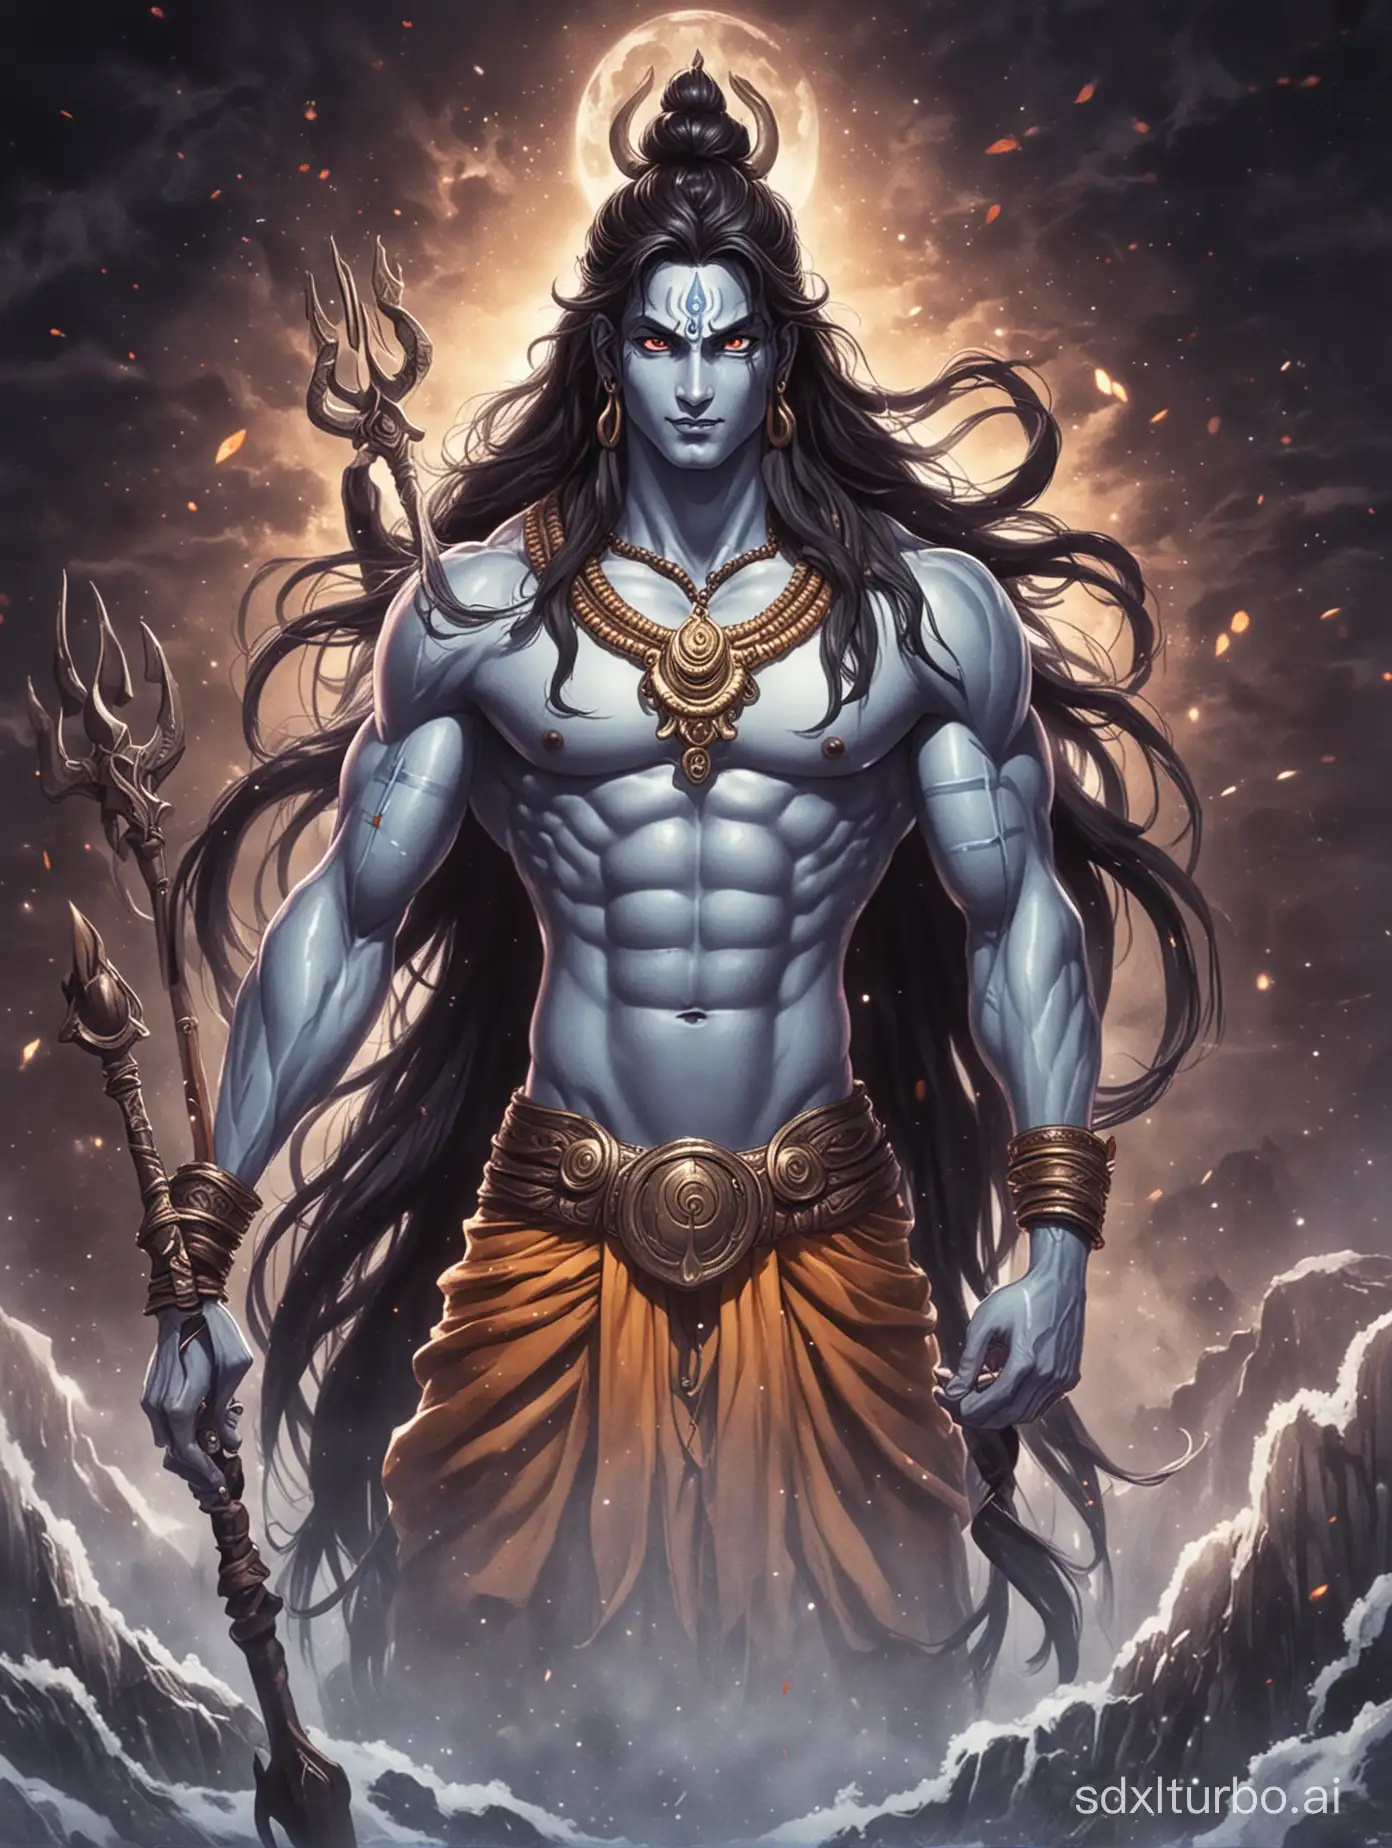 Majestic-Lord-Shiva-in-Anime-Style-Revered-Hindu-Deity-with-Divine-Aura